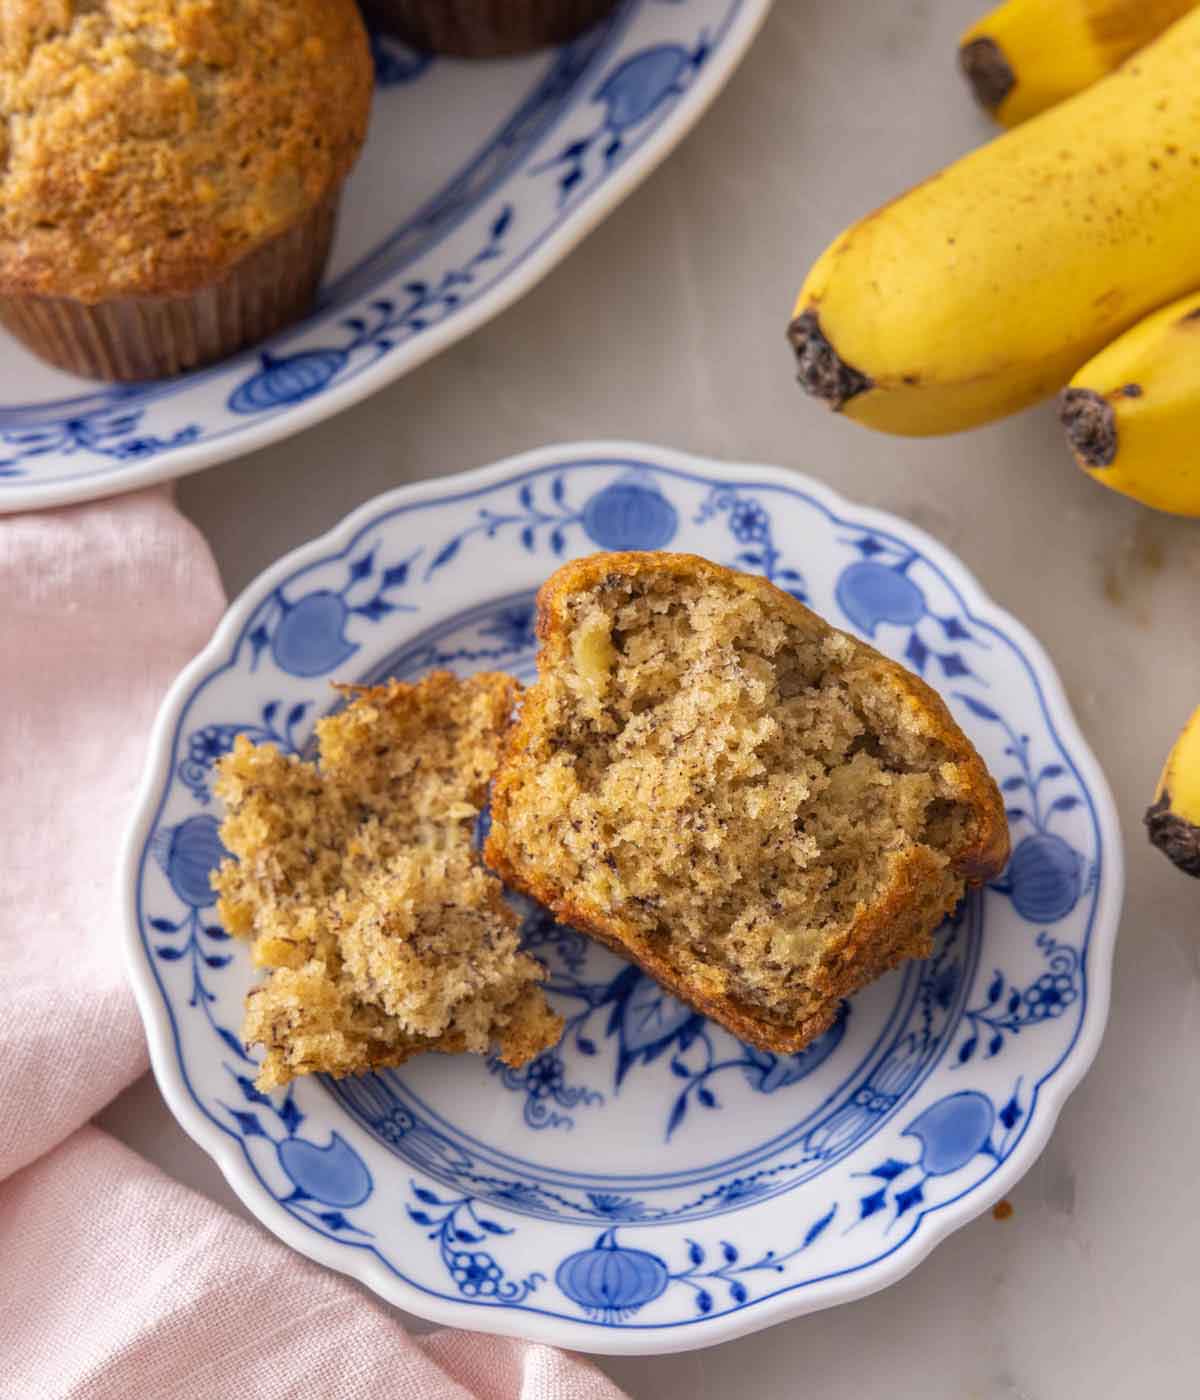 A plate with a banana muffins torn in half to show the cross section.